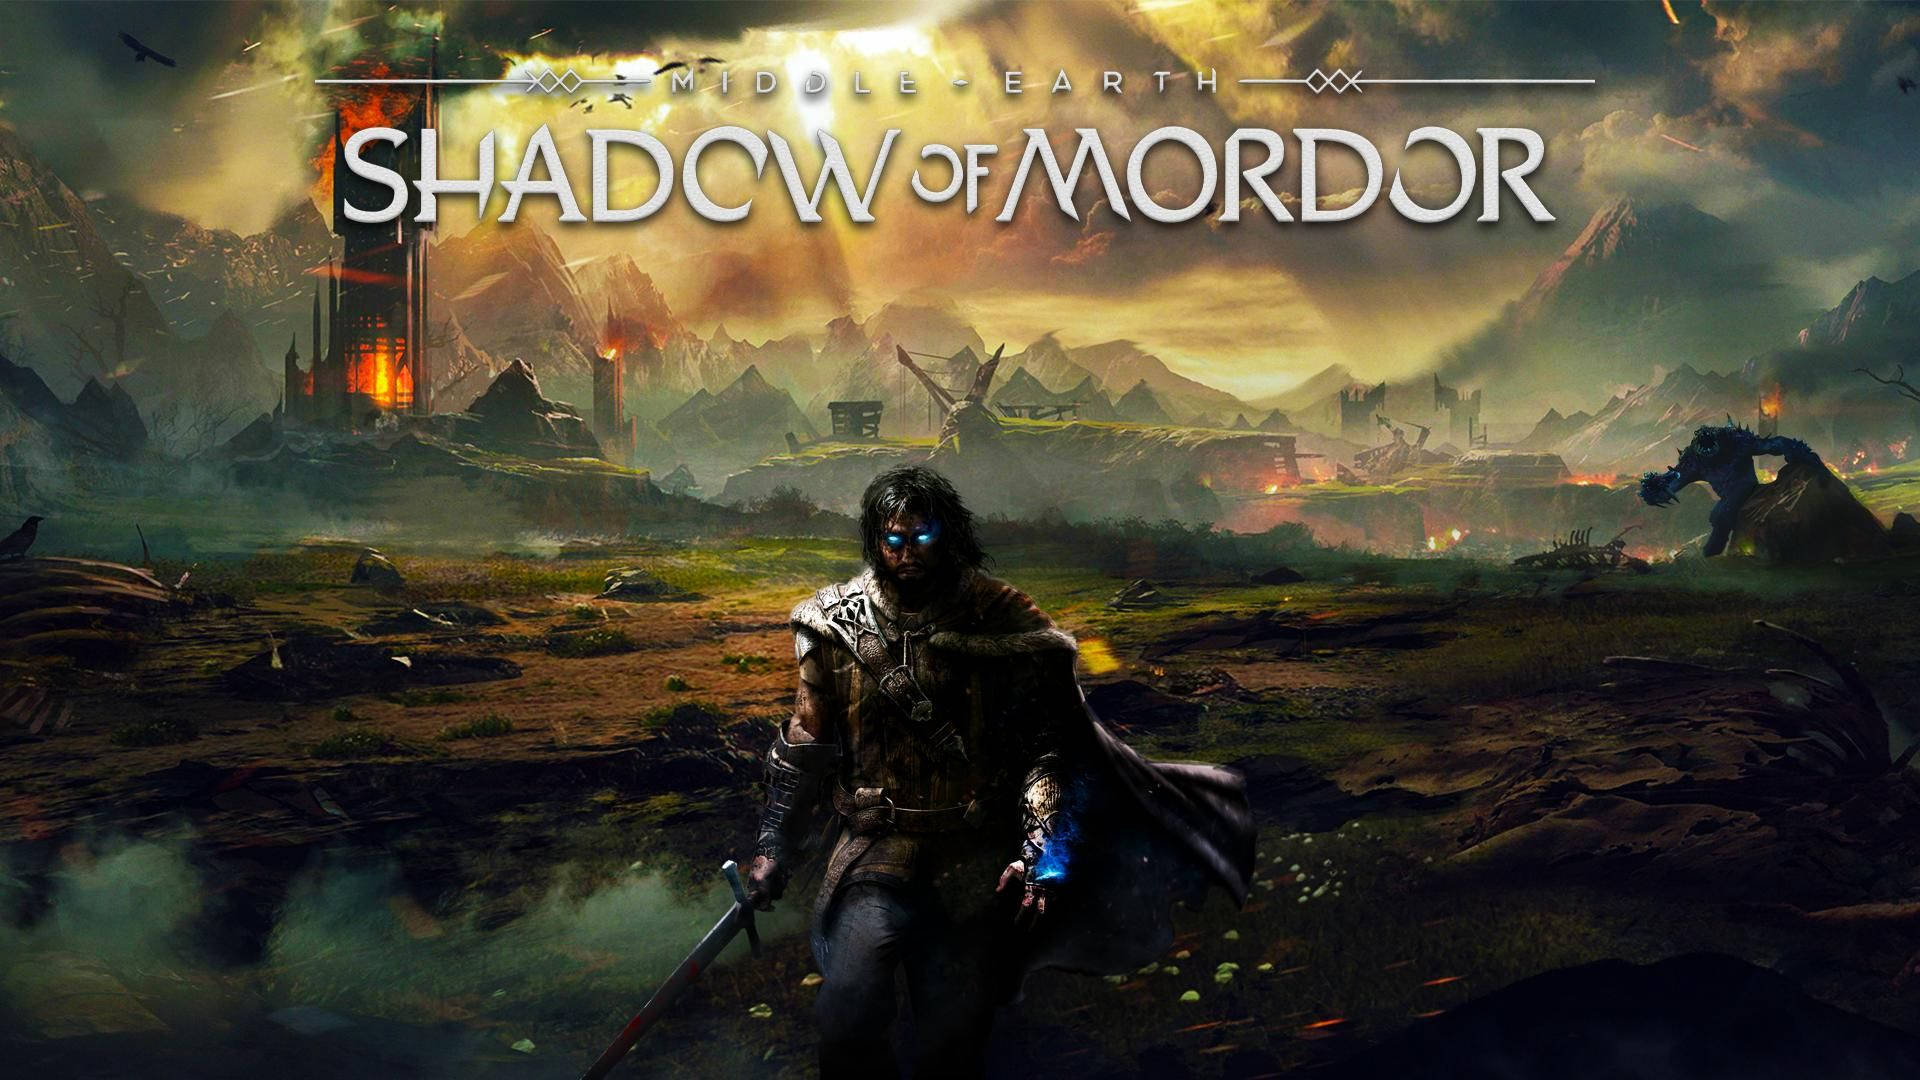 Free Middle Earth Shadow Of Mordor Wallpaper Downloads, [100+] Middle Earth  Shadow Of Mordor Wallpapers for FREE 